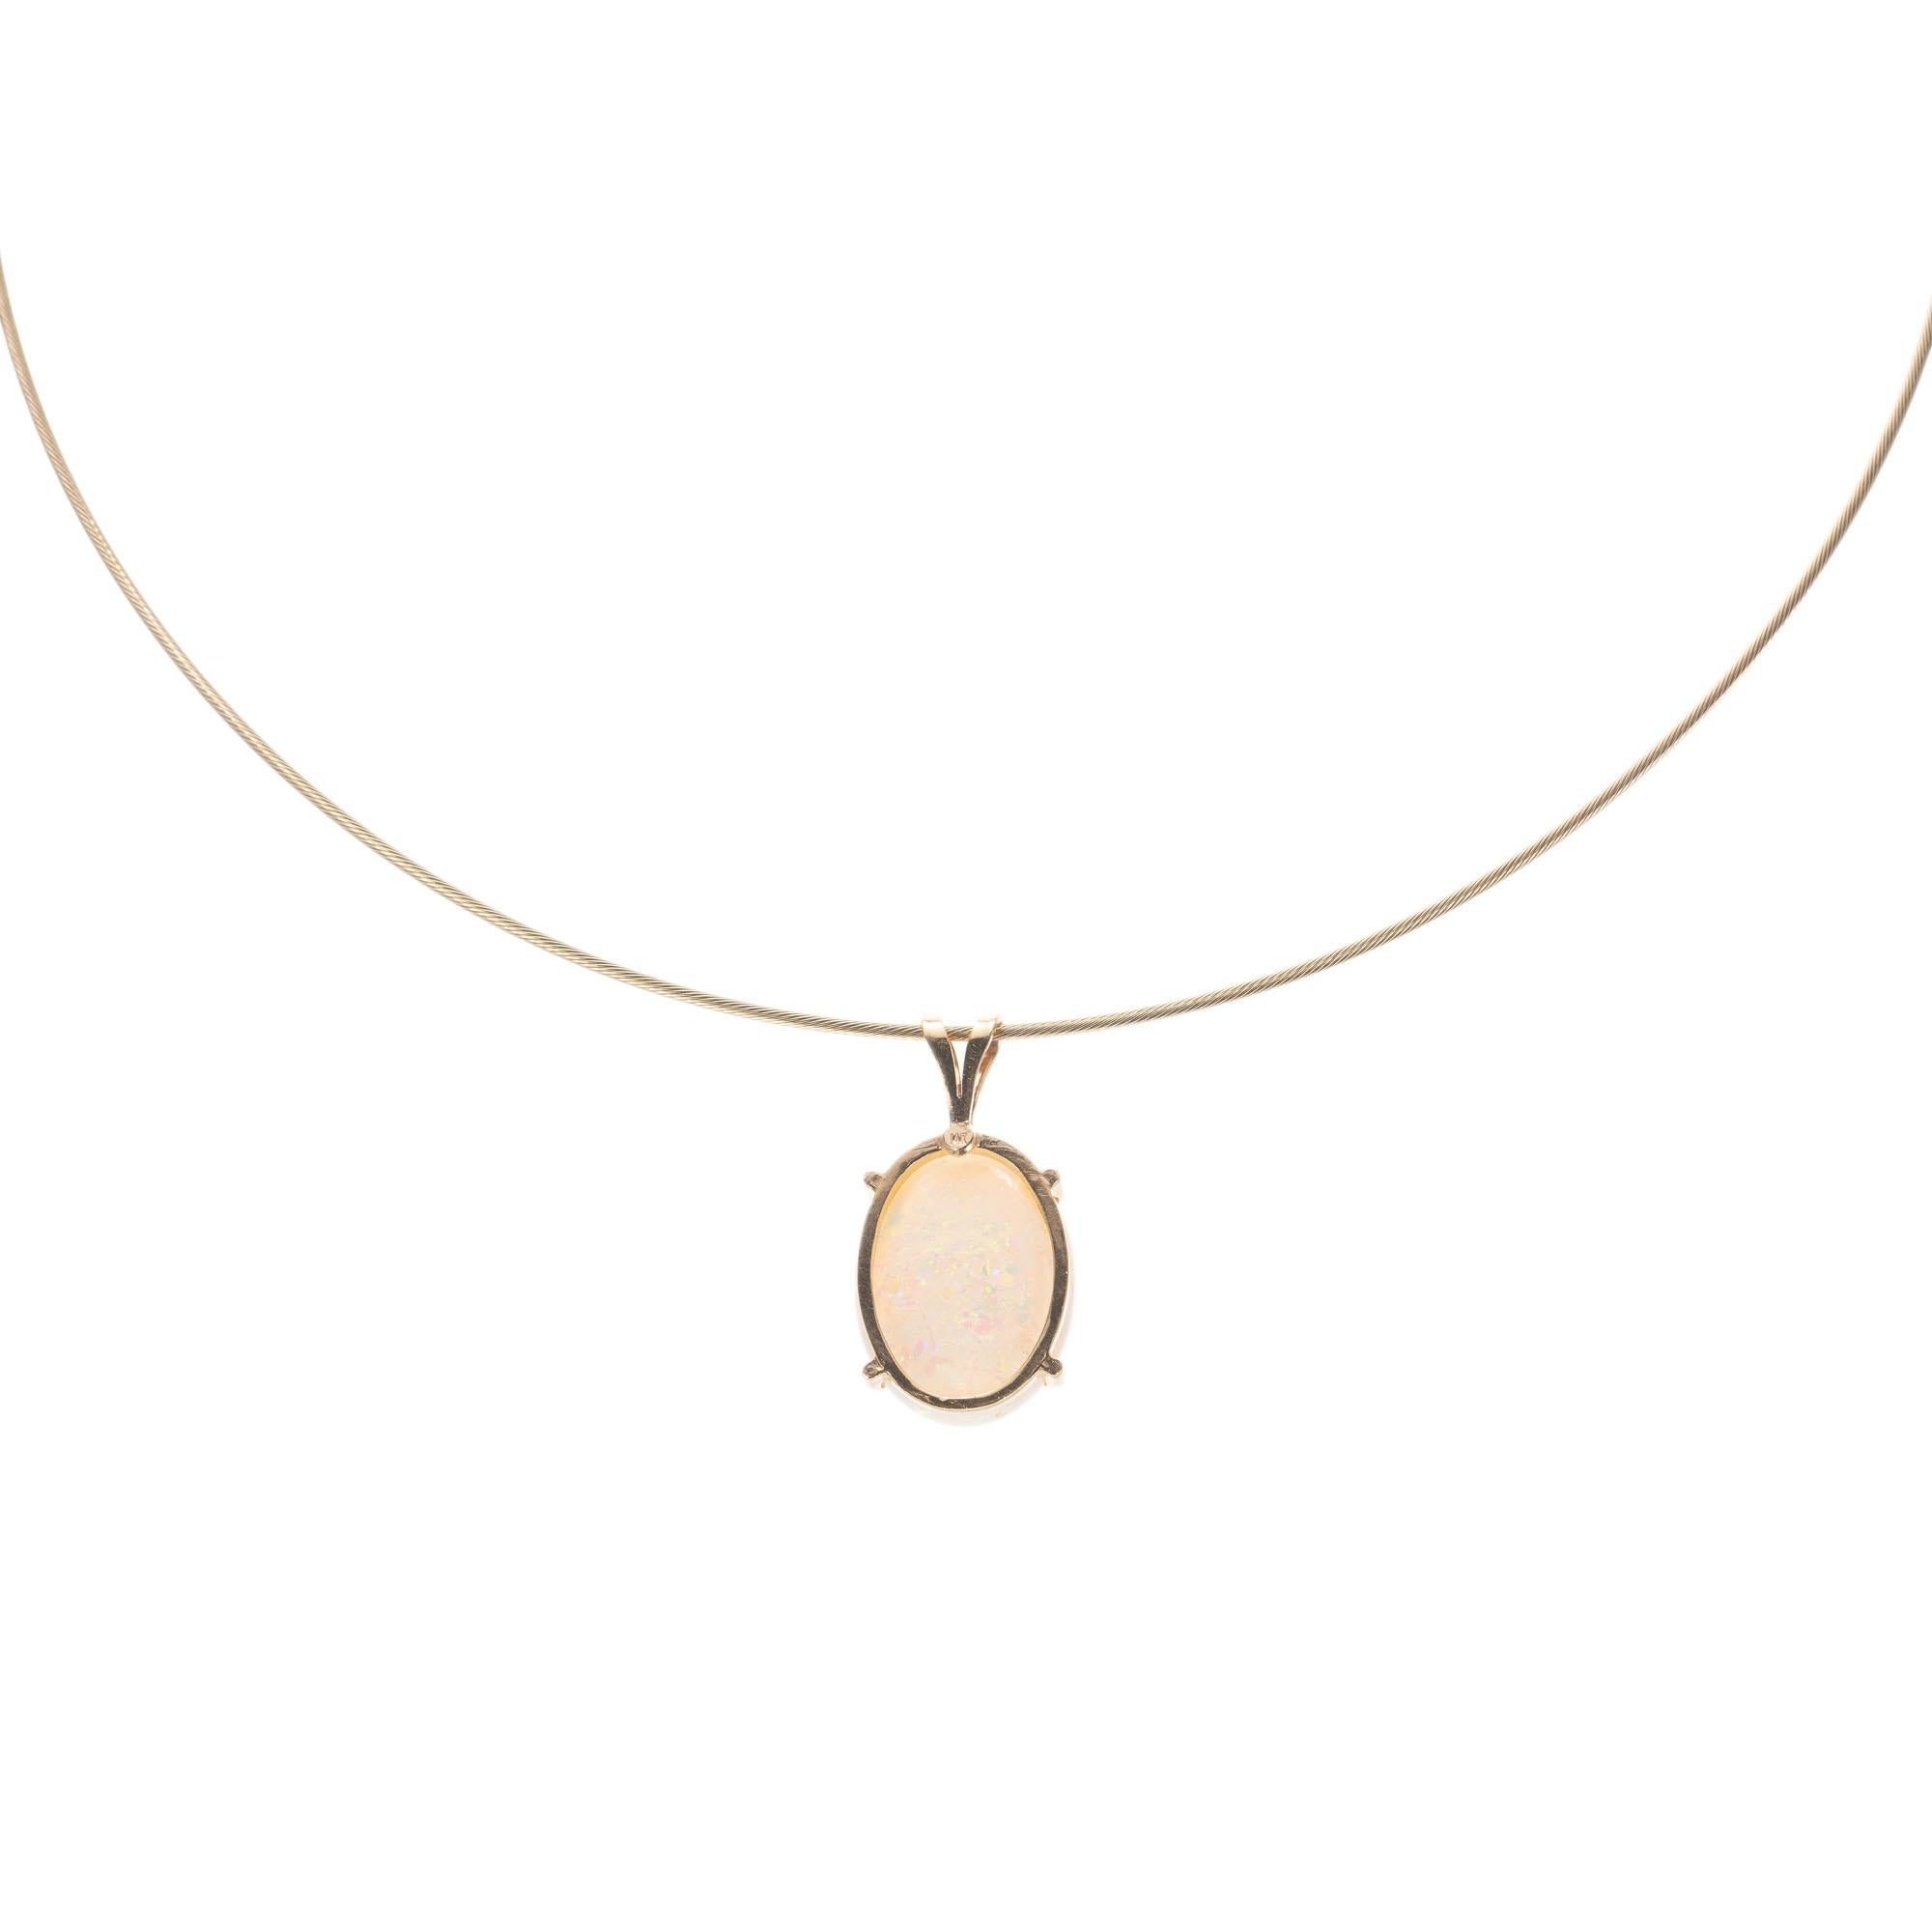 Oval 7.50 carat opal pendant,  14k yellow gold wire necklace. 16 inches

1 oval 7.50 carat opal 18x13.5mm
14k yellow gold
Length: 16 inches.
